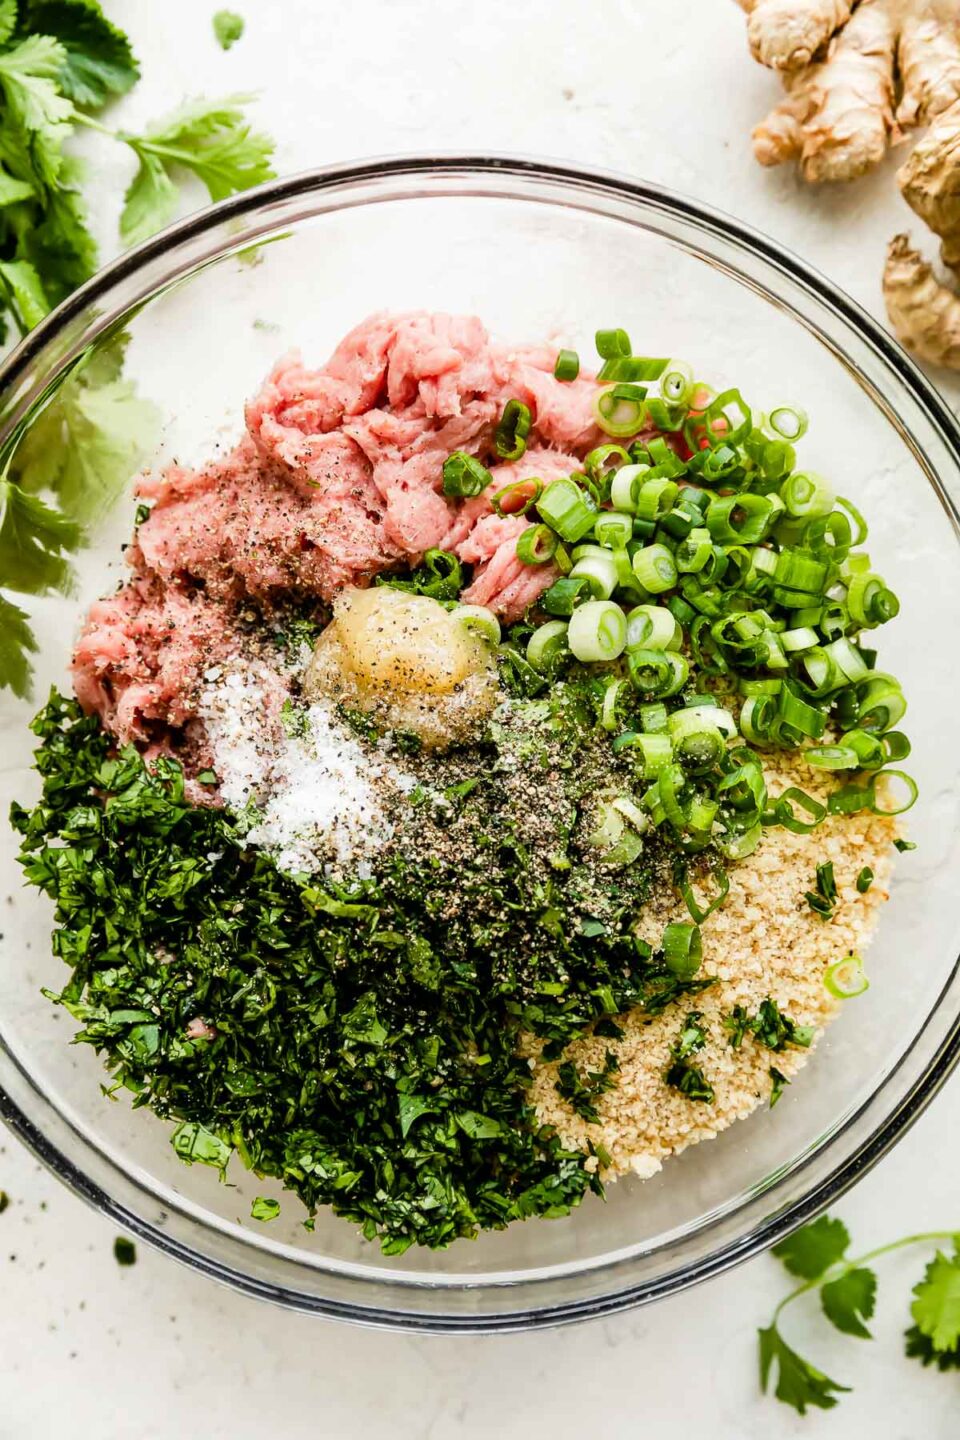 Ground turkey or chicken, green onions, garlic, panko breadcrumbs, cilantro, and ginger are added to large glass mixing bowl that sits atop a creamy white textured surface. The bowl is surrounded by whole fresh ginger and fresh cilantro stems.